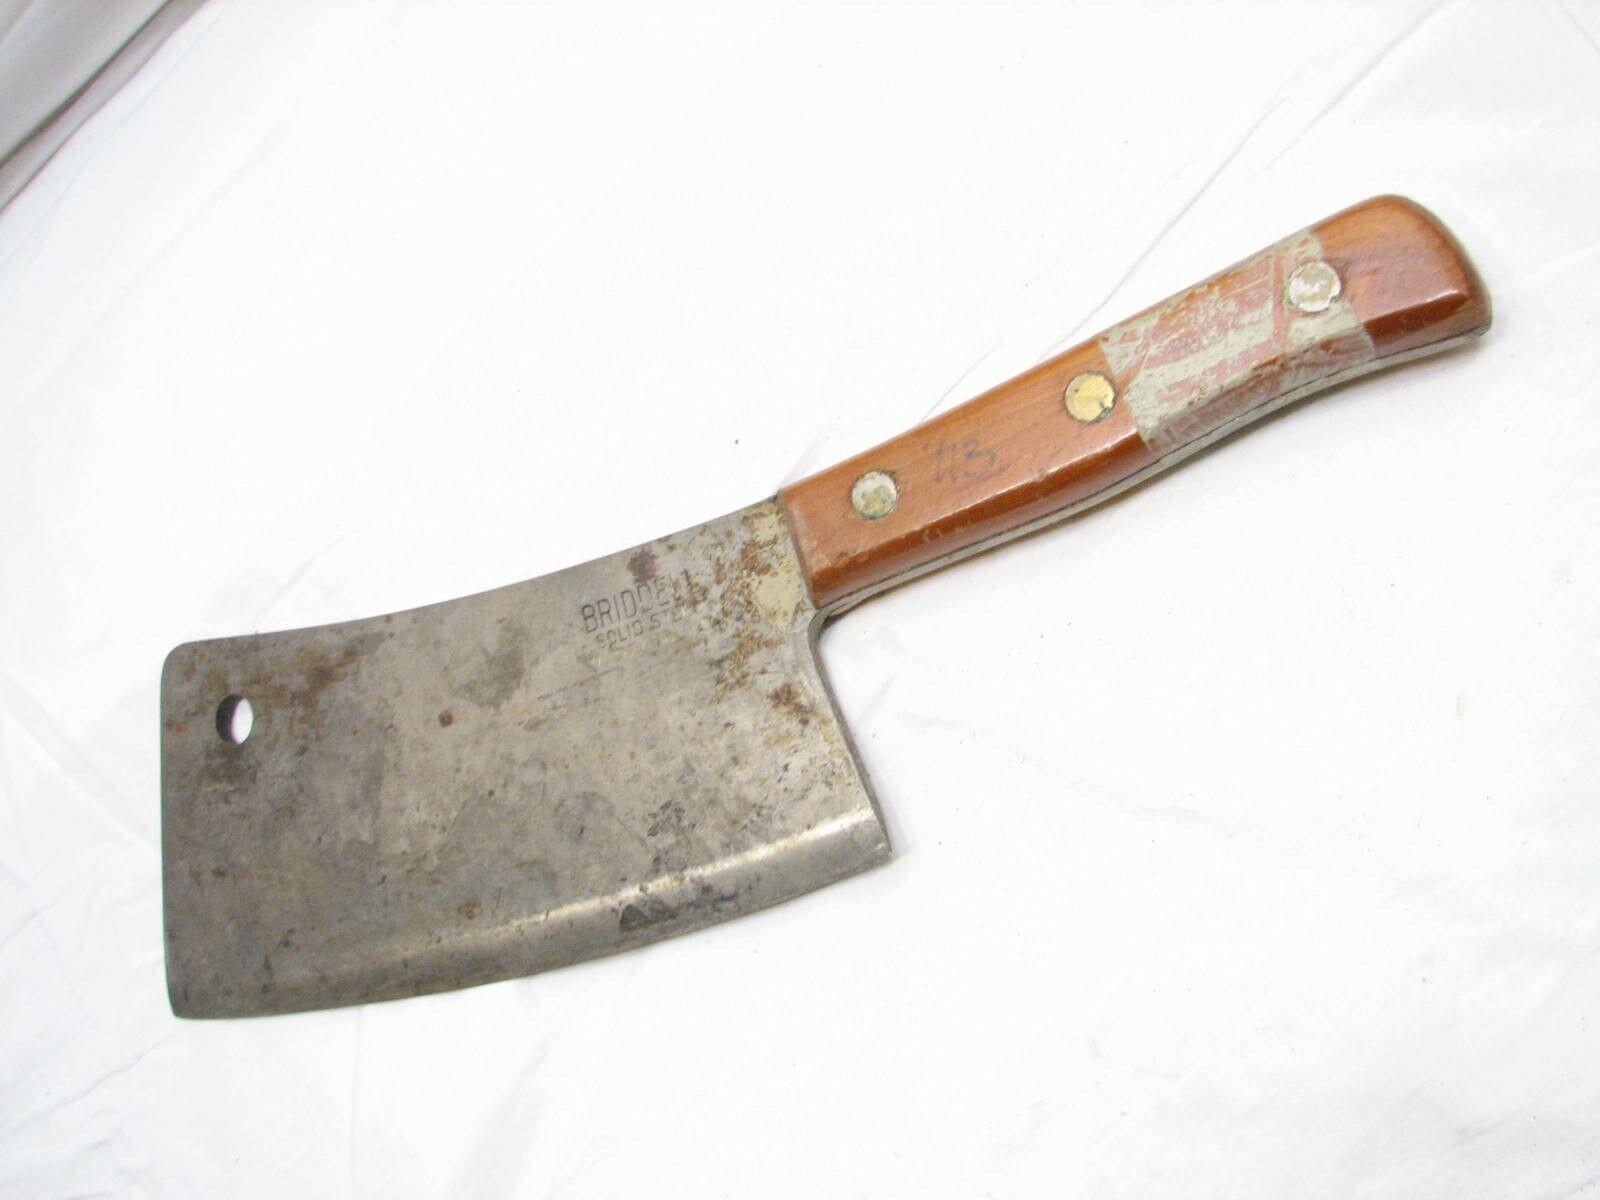 Early Biddle Large Steel Butchers Meat Cleaver Butchering Kitchen Tool